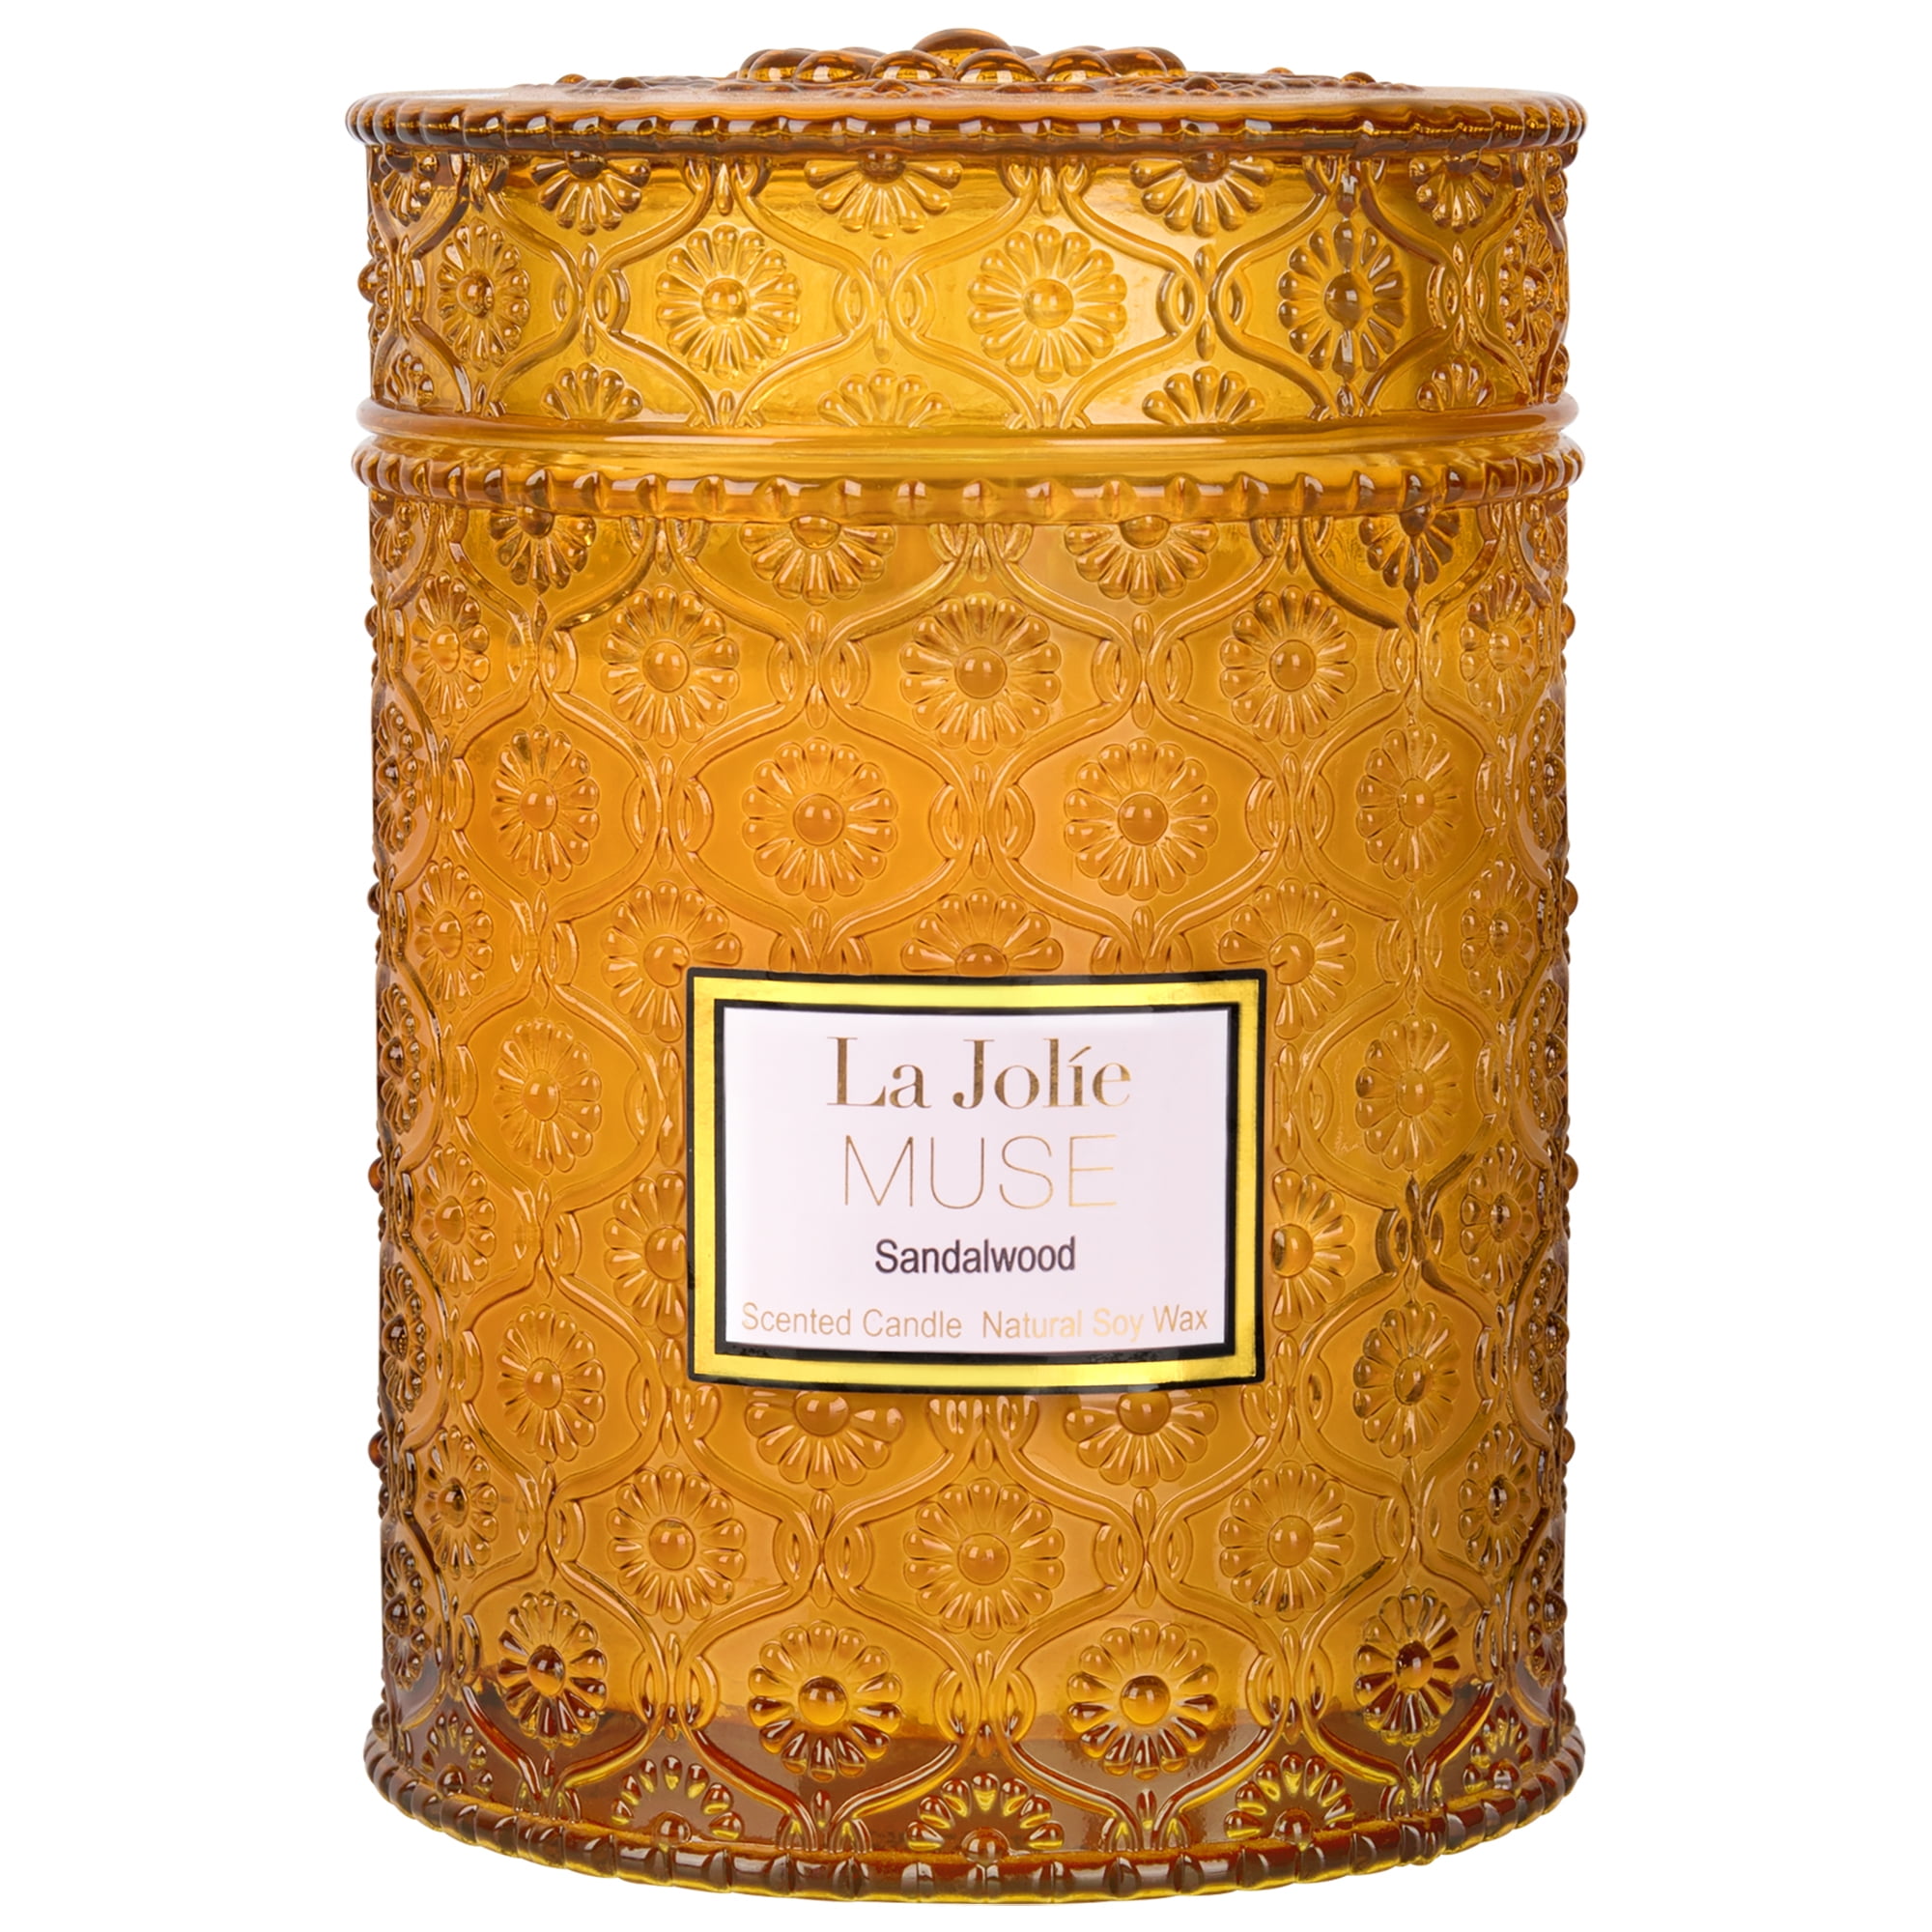 LA JOLIE MUSE Gardenia & Ylang Ylang Scented Candle Soy Candle for Home Large 